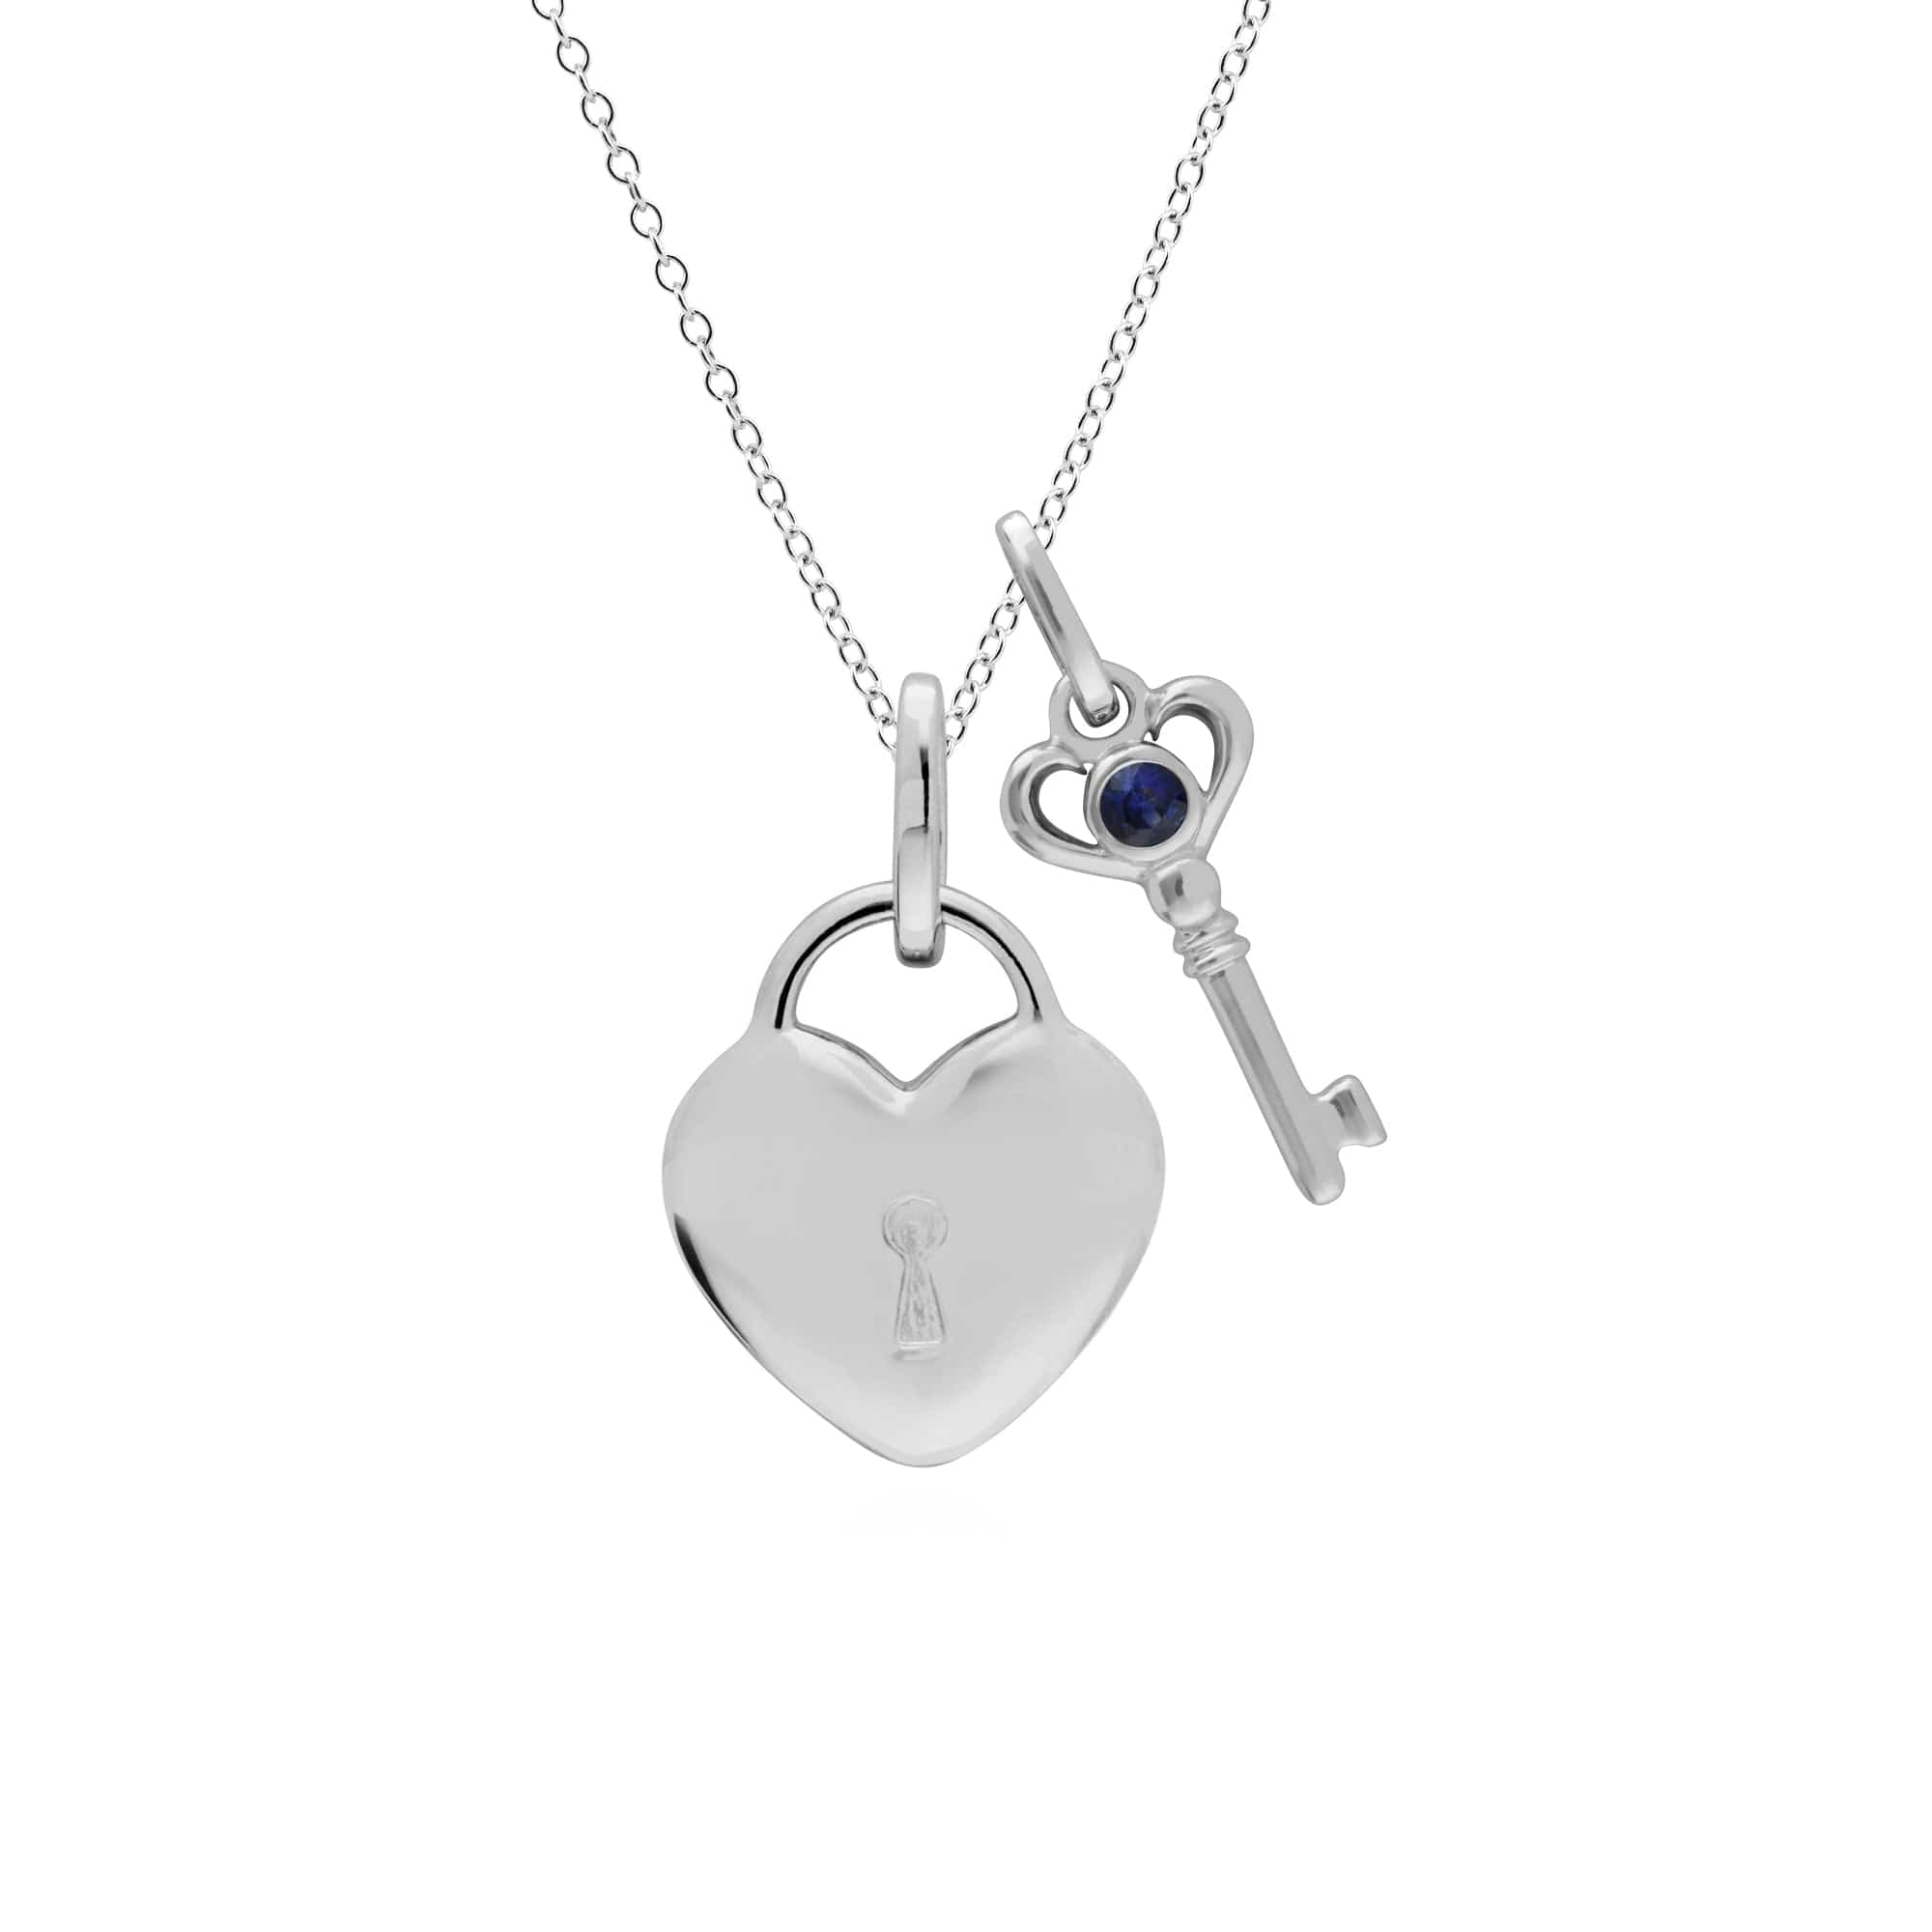 270P026403925-270P027001925 Classic Heart Lock Pendant & Sapphire Key Charm in 925 Sterling Silver 1